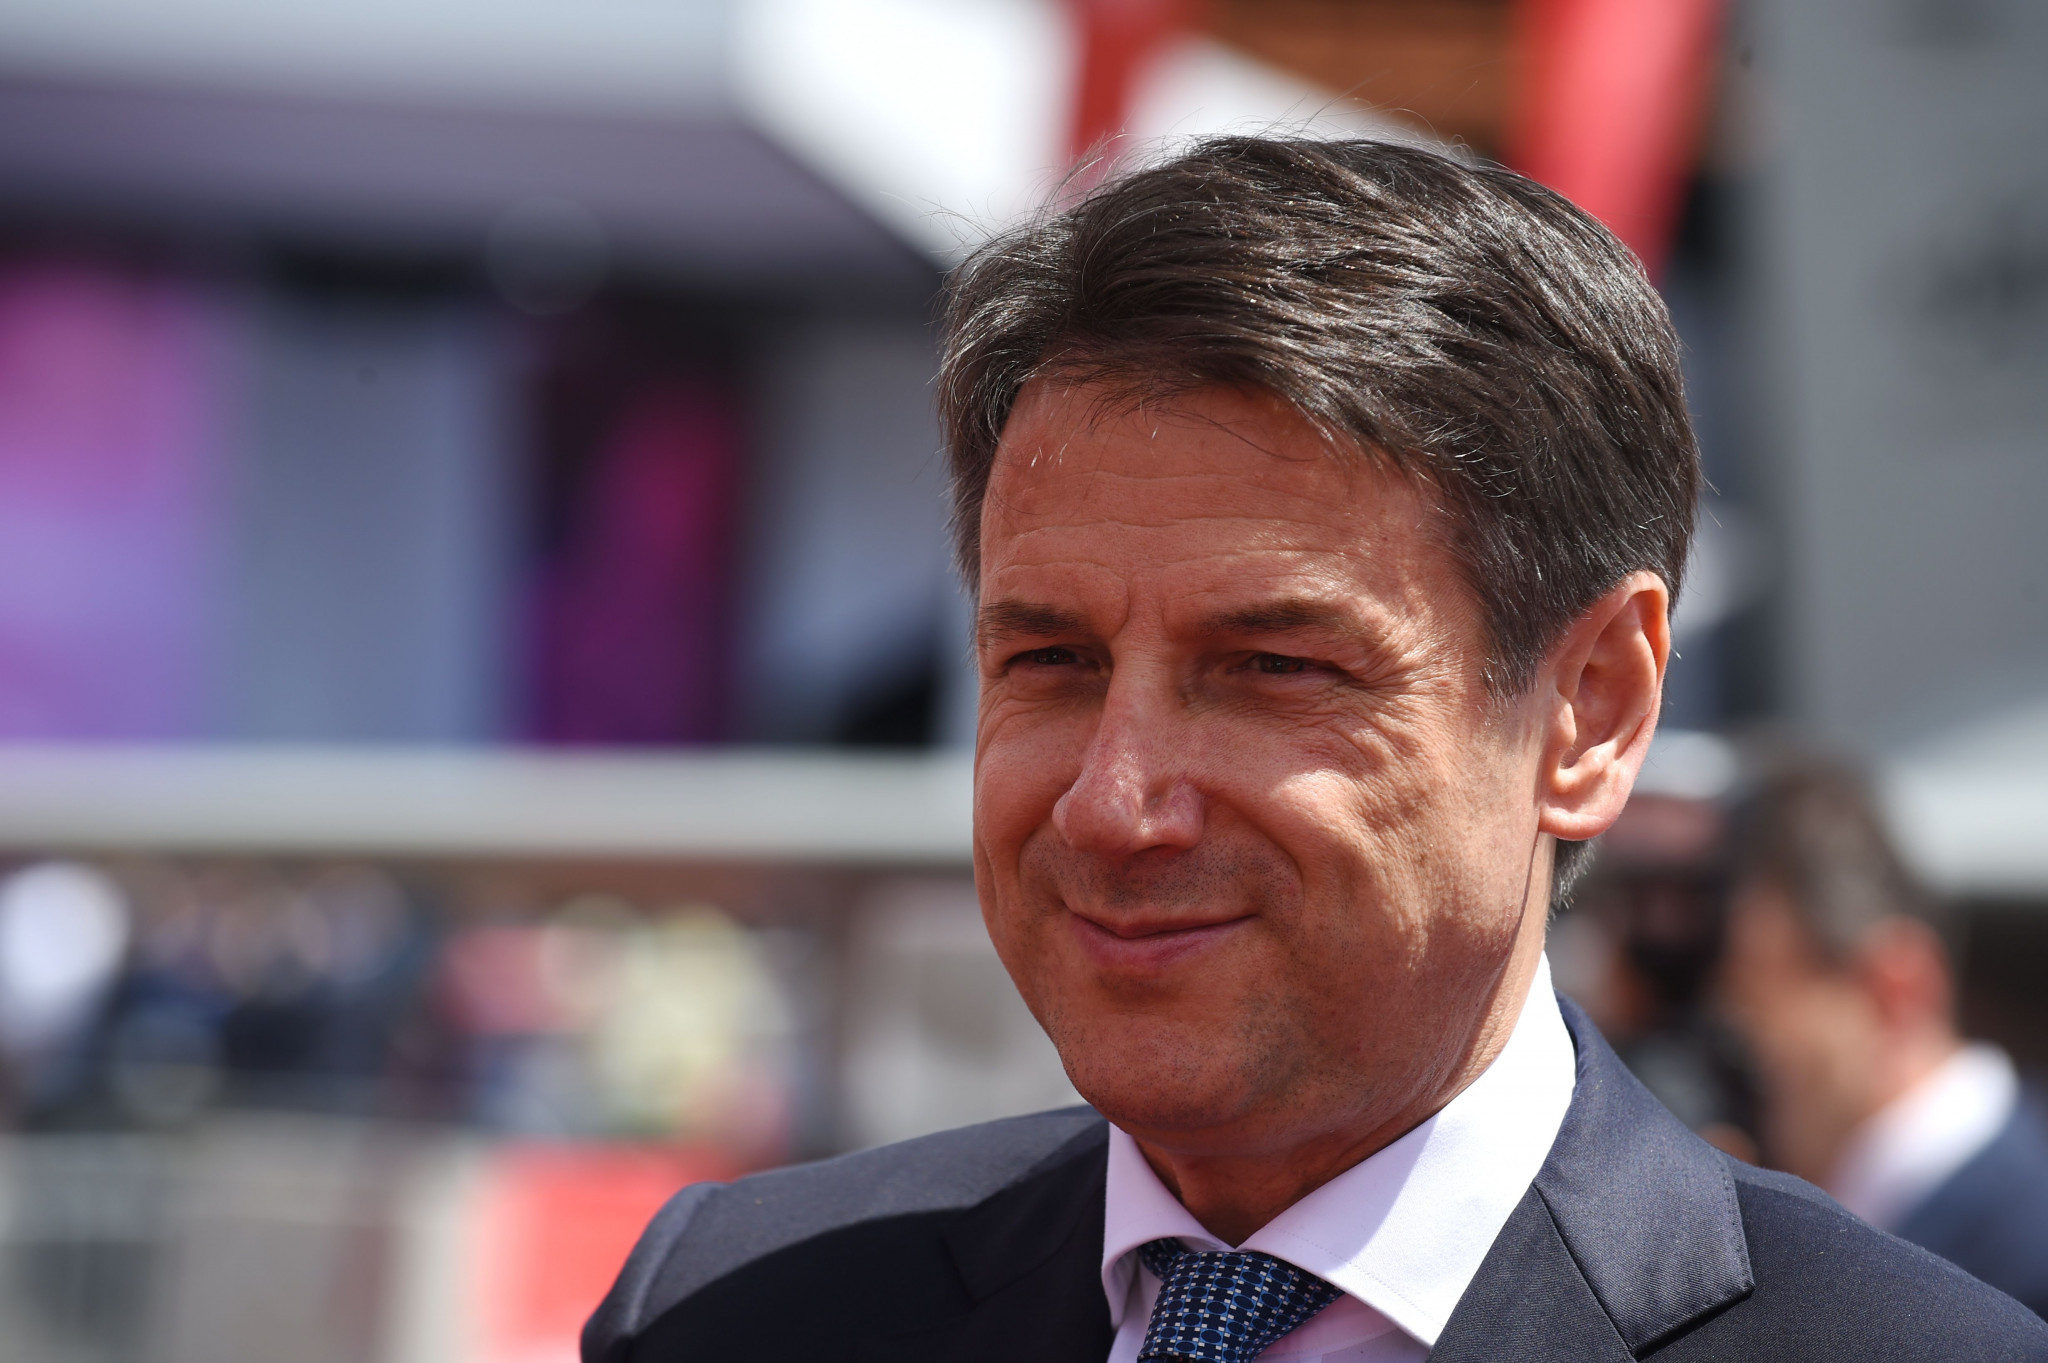 Italian Prime Minister to attend vote on 2026 Winter Olympic Games host to support Milan Cortina